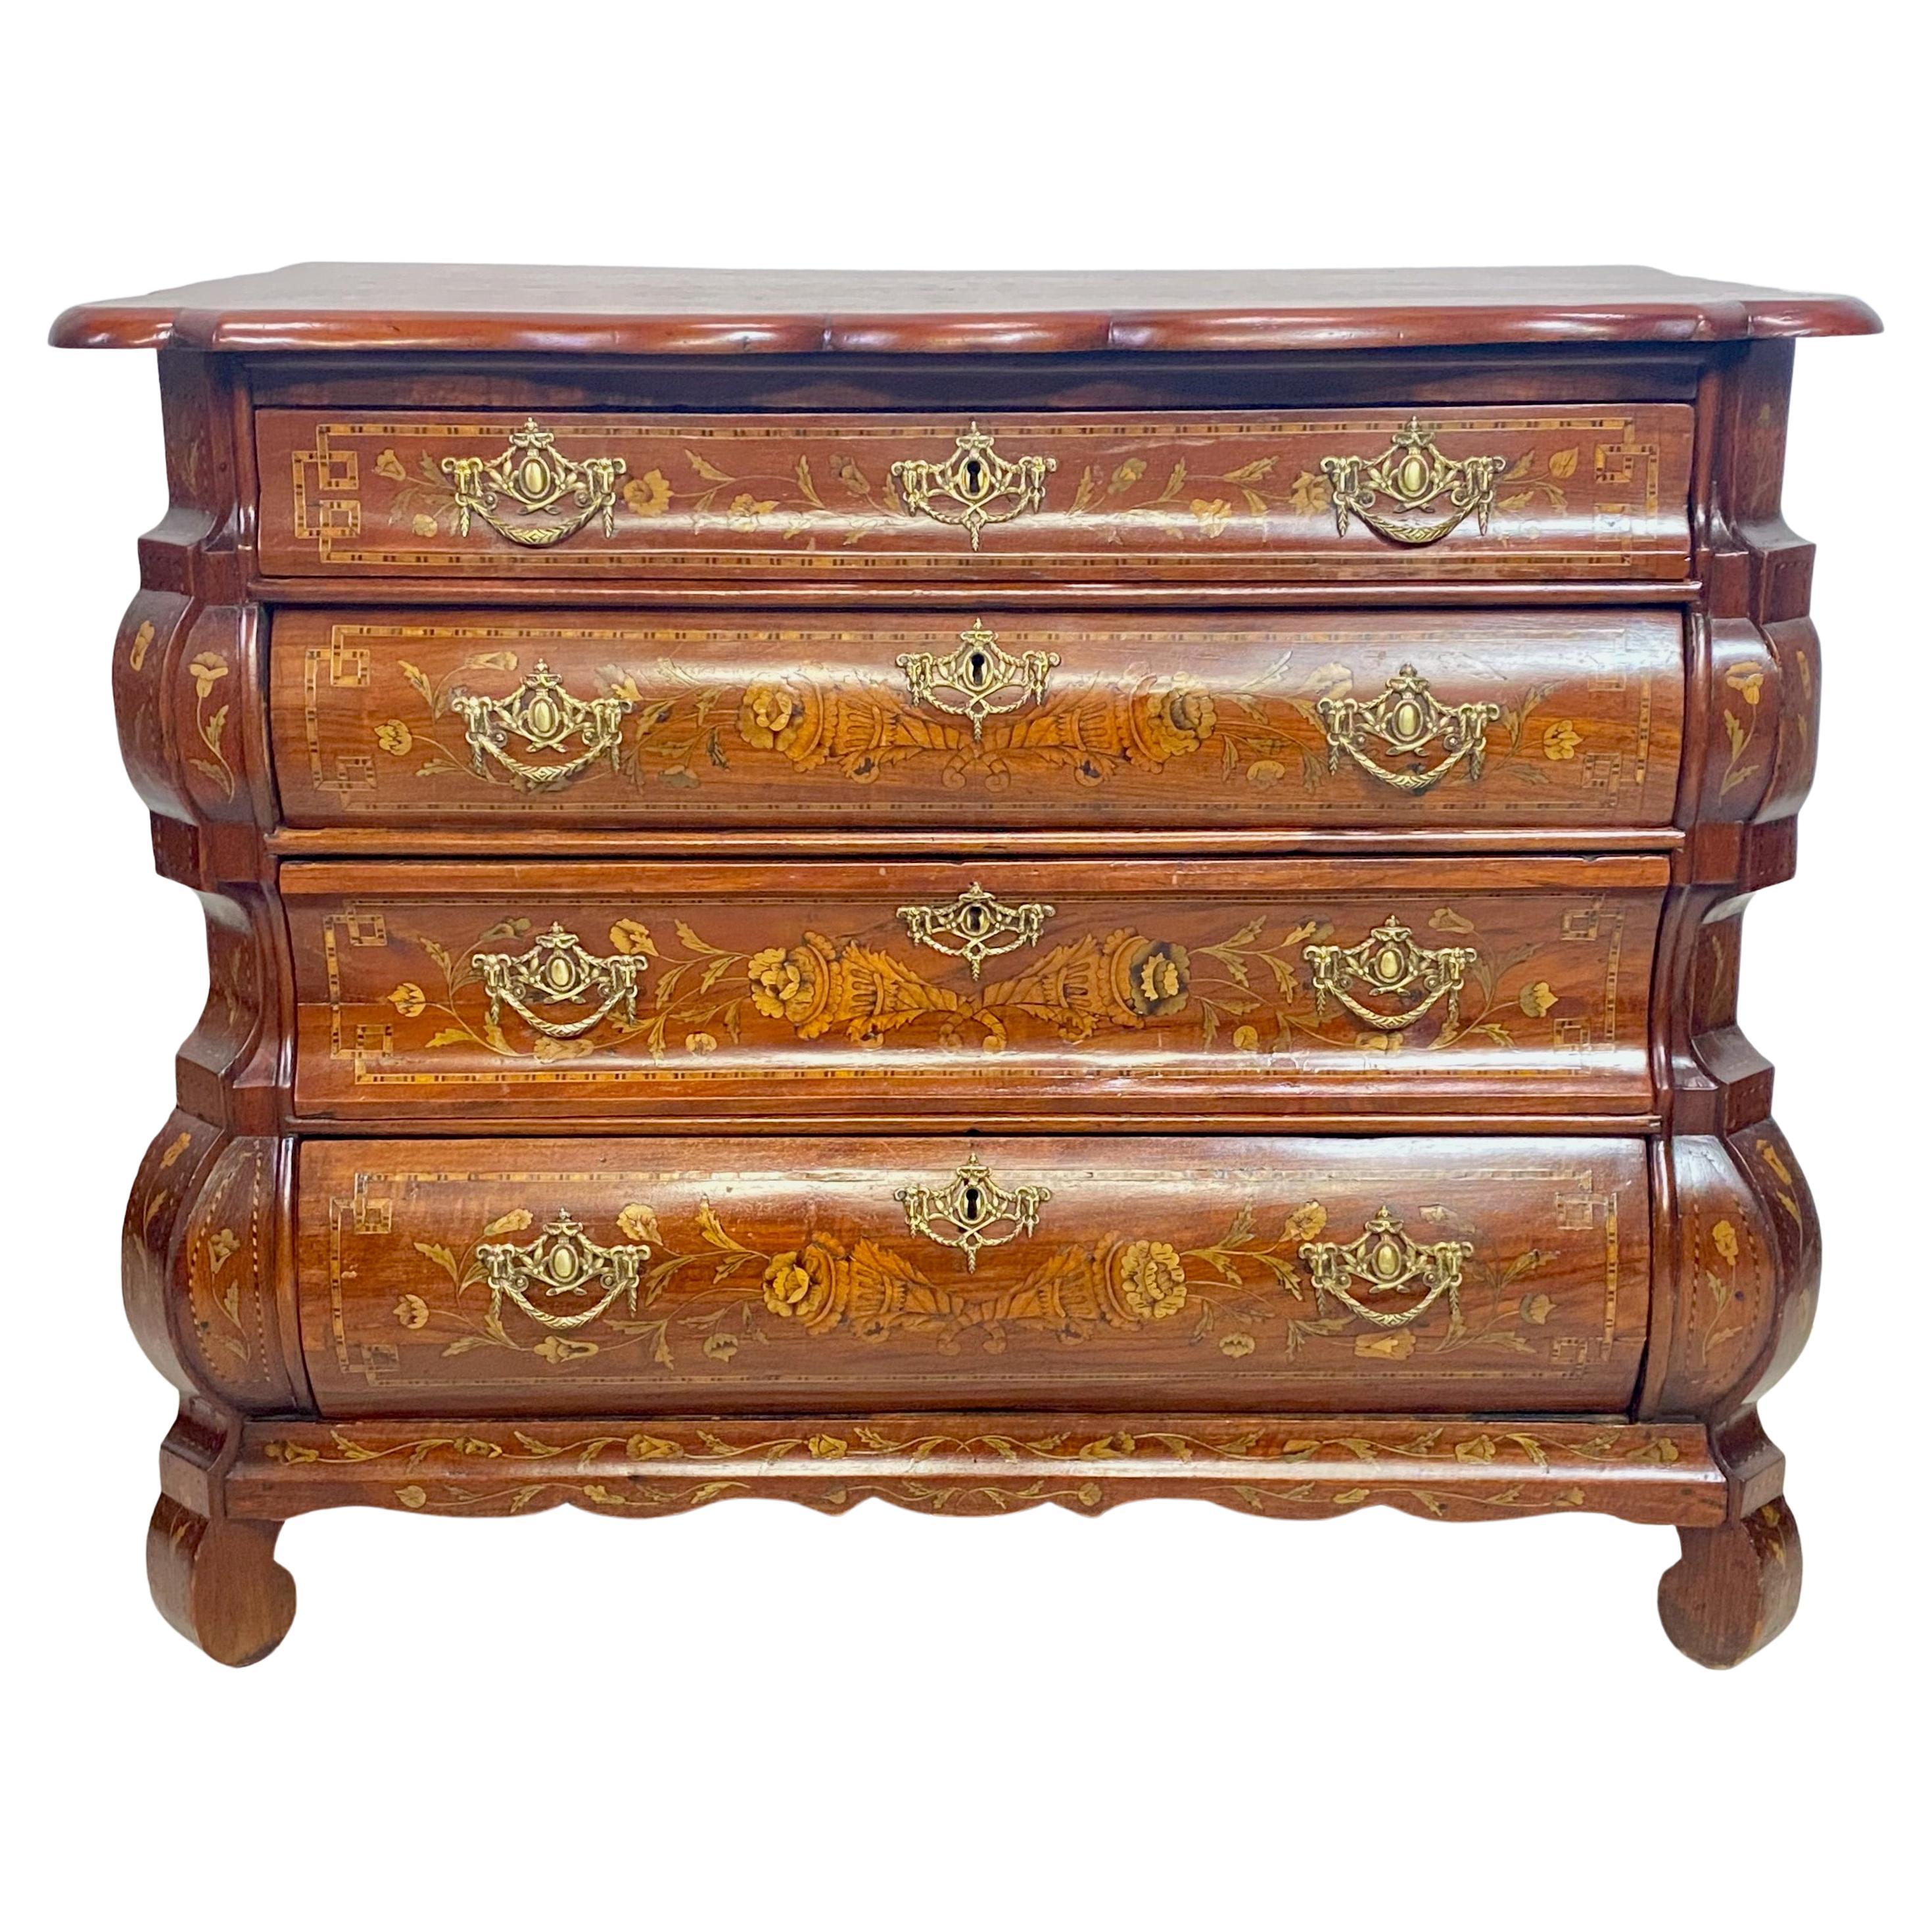 Walnut Bombe Style Chest with Satinwood and Fruit Wood Inlay, 18th Century Dutch For Sale